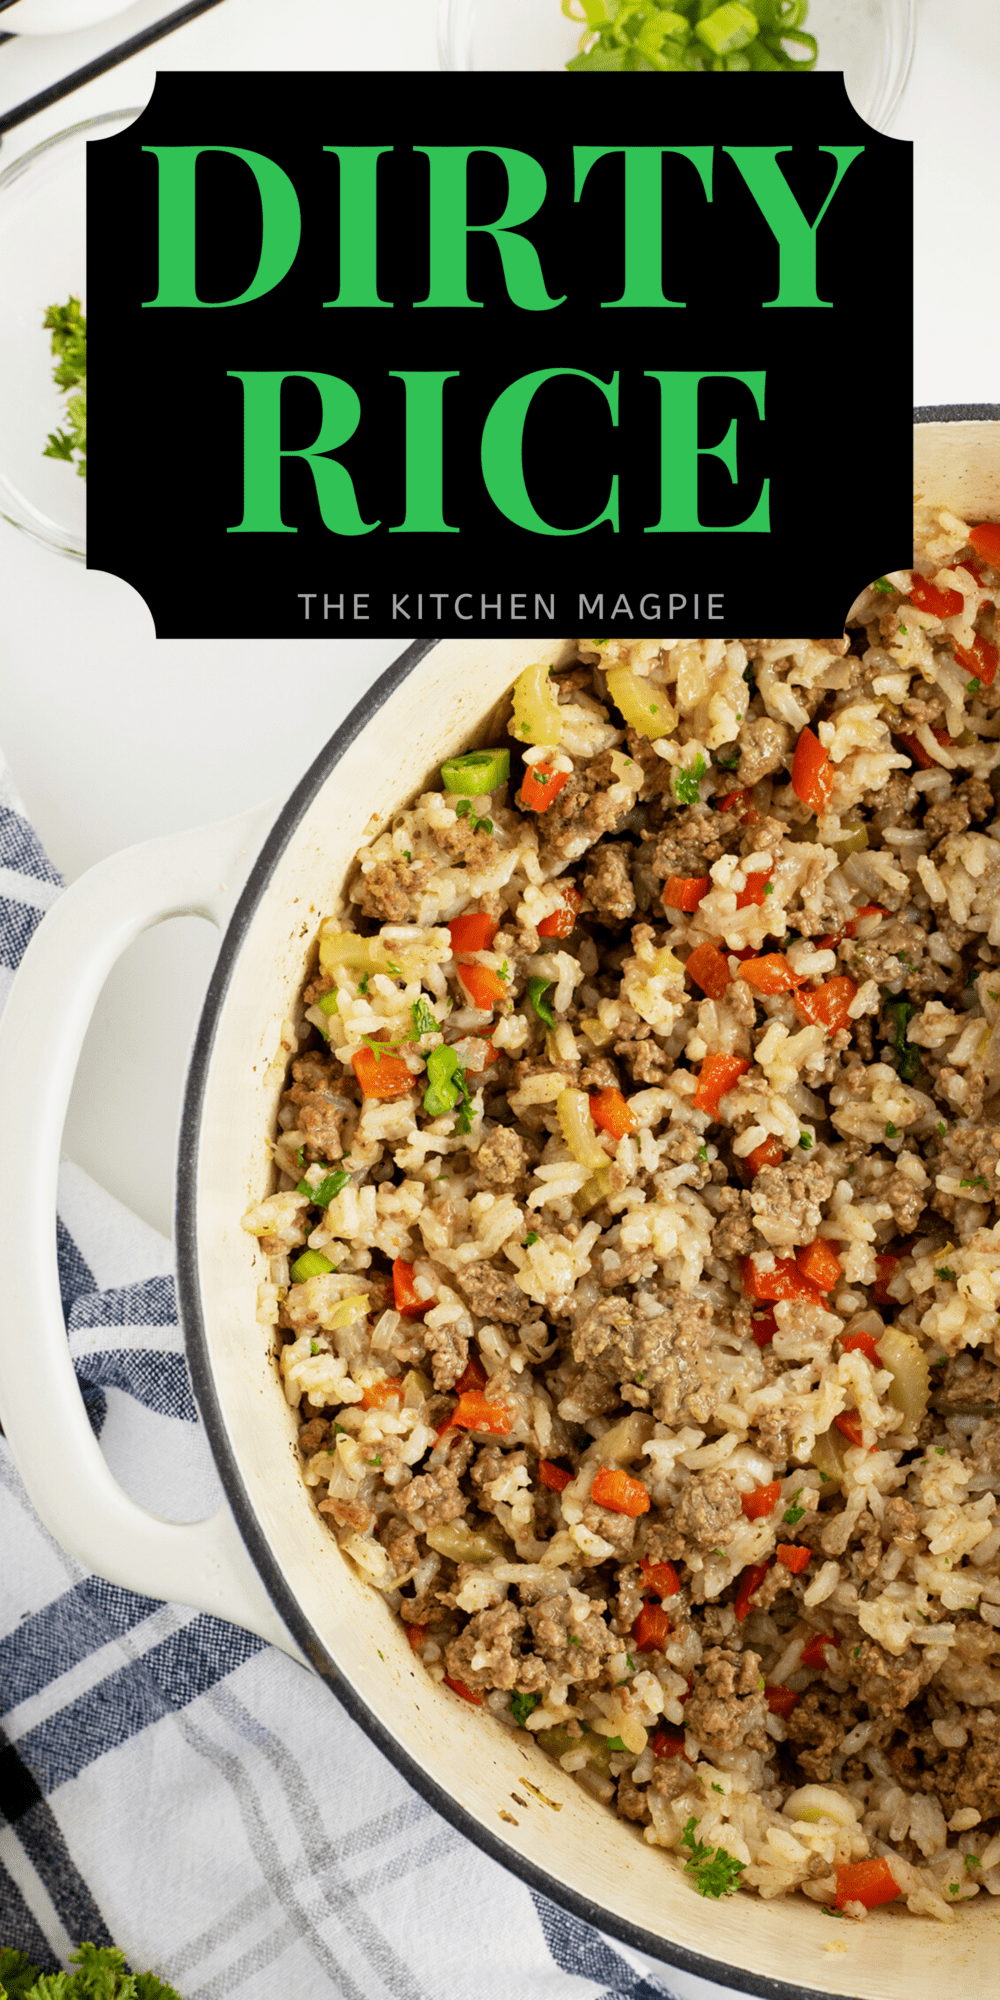 A Creole classic, dirty rice is the perfect dish to make to get in touch with some Southern roots. As long as it looks dirty, browned, meaty, and savory, it is probably going to be delicious!